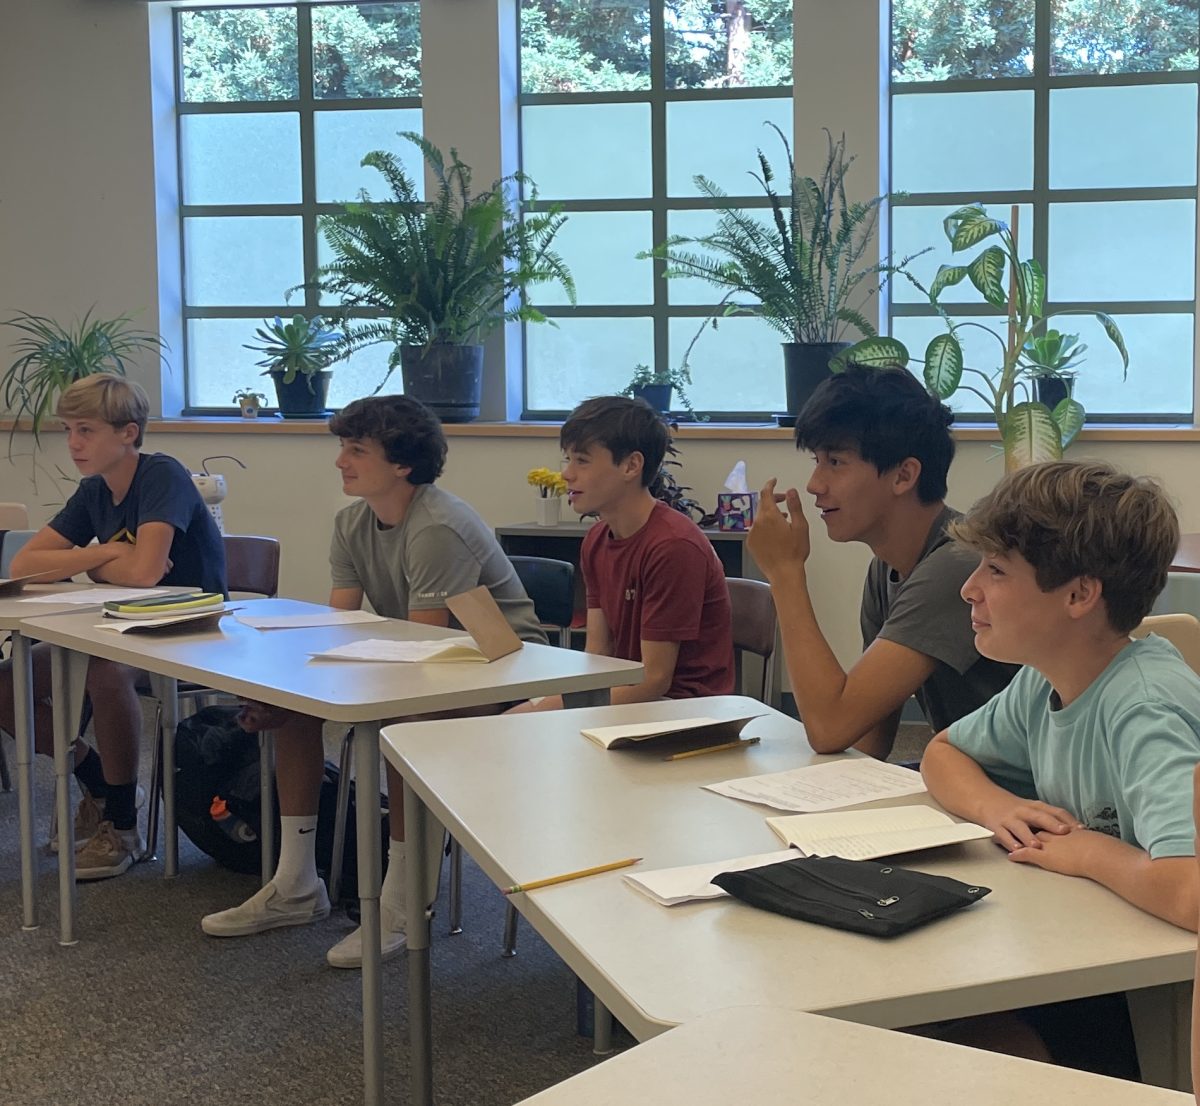 Freshmen+Parker+Richardson%2C+Merrick+Ward%2C+Rafe+Weiden+%28left+to+right%29+and+Benji+Rubin+%28far+right%29+listen+to+a+con-%0Aversation+between+Ethics+teacher+Jack+Bowen+and+freshman+Charles+Mura+%28second+from+right%29+about+the+ethicality+of+%E2%80%98flopping%E2%80%99+while+playing+soccer.+%E2%80%9CI%E2%80%99d+learned+a+little+about+%5Bethics%5D+while+in+Menlo+Middle%2C+but+the+seminar+class+was+really+cool+because+I+got+to+learn+about+the+topic+in+a+different+way%2C%E2%80%9D+Rubin+said.+Staff+photo%3A+Alyssa+McAdams